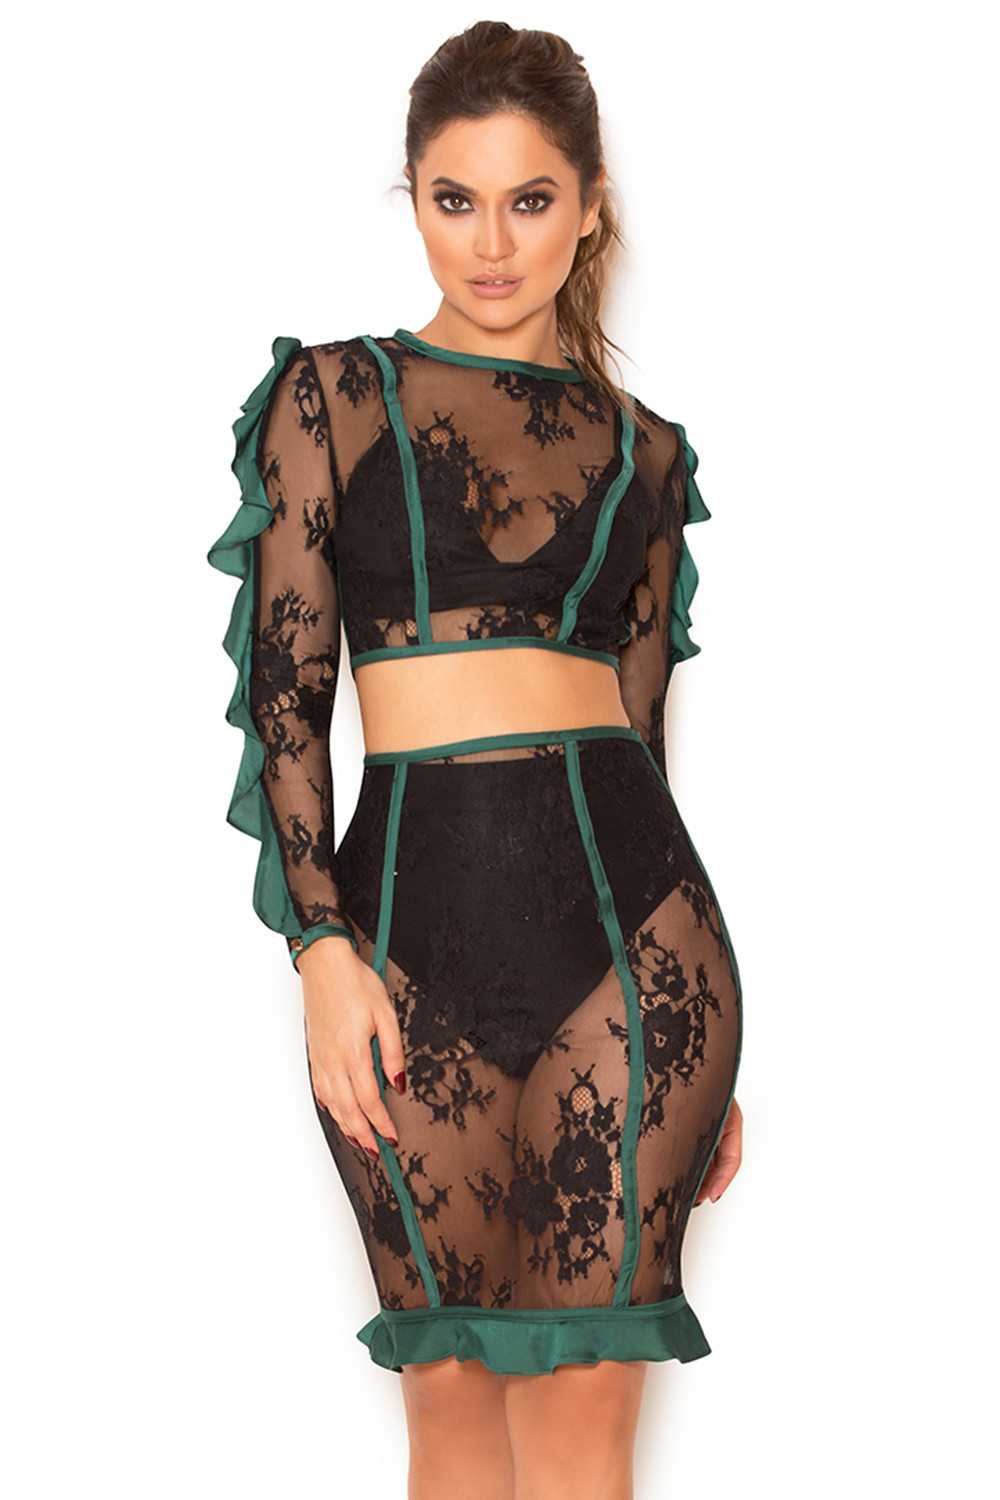 'Martel' Emerald and Black Lace Ruffle Two Piece - SALE